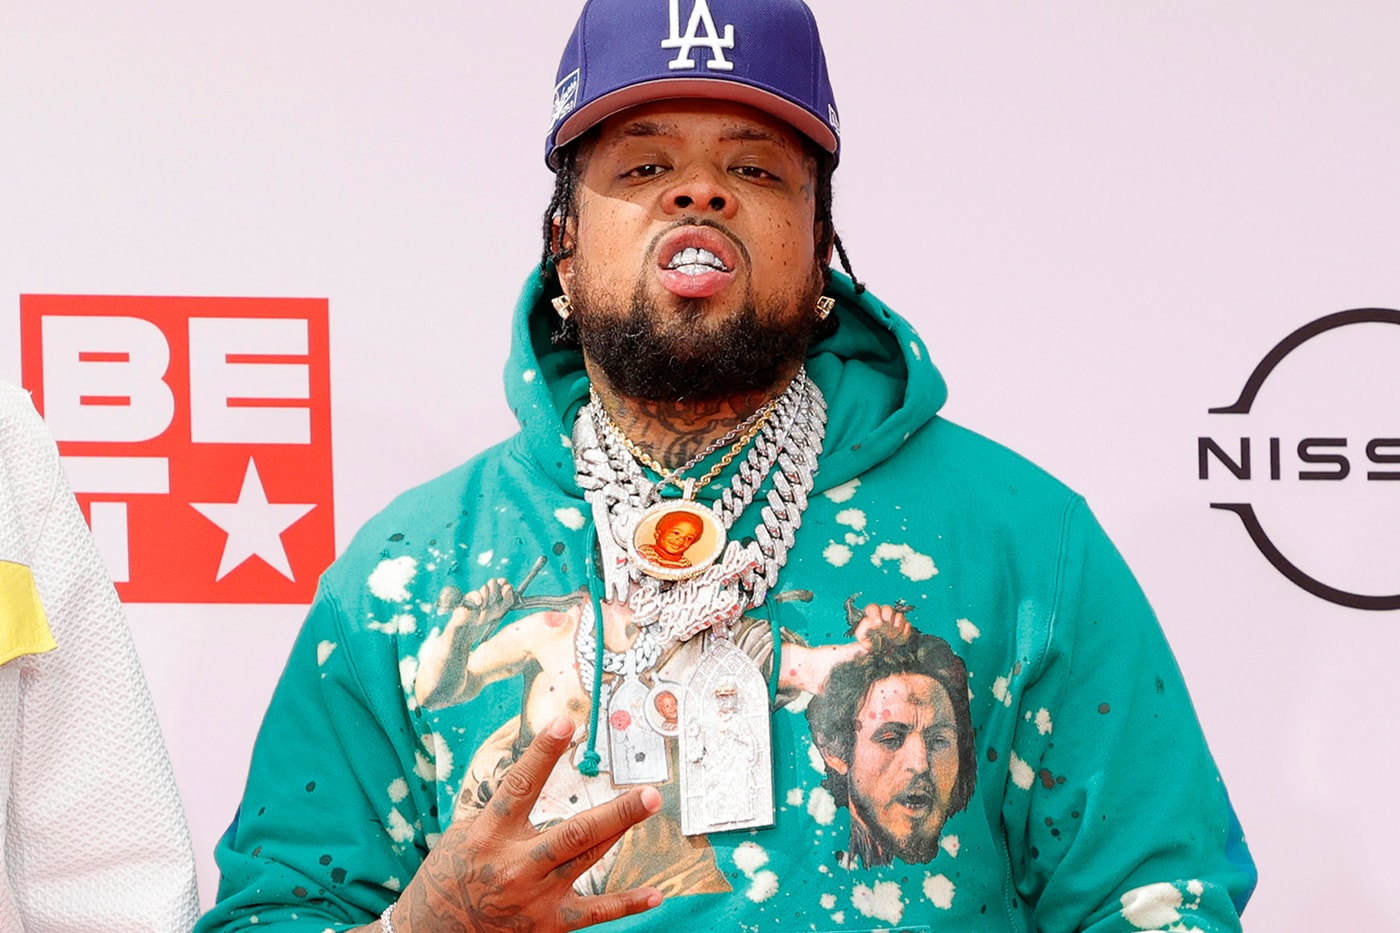 Westside Gunn Announces Two New Albums in 2021